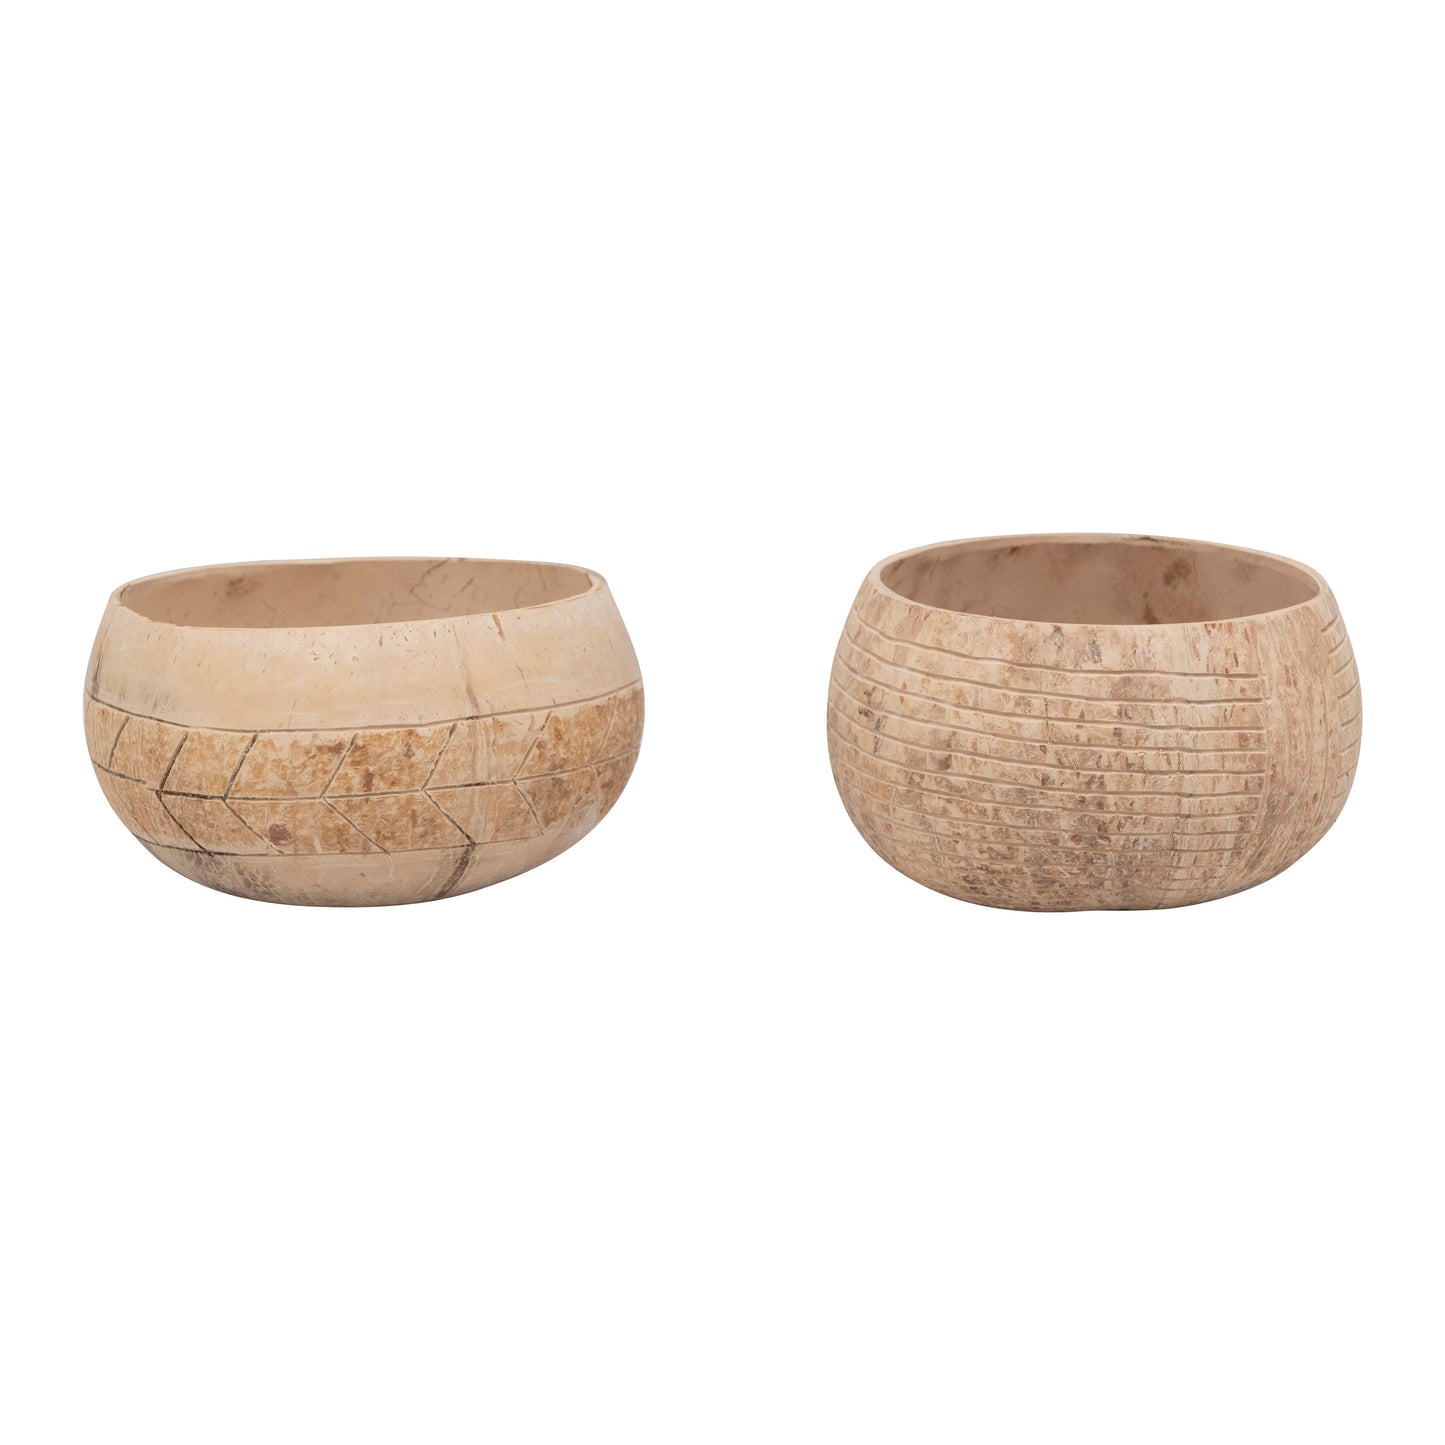 Decorative Hand-Carved Coconut Shell Bowl